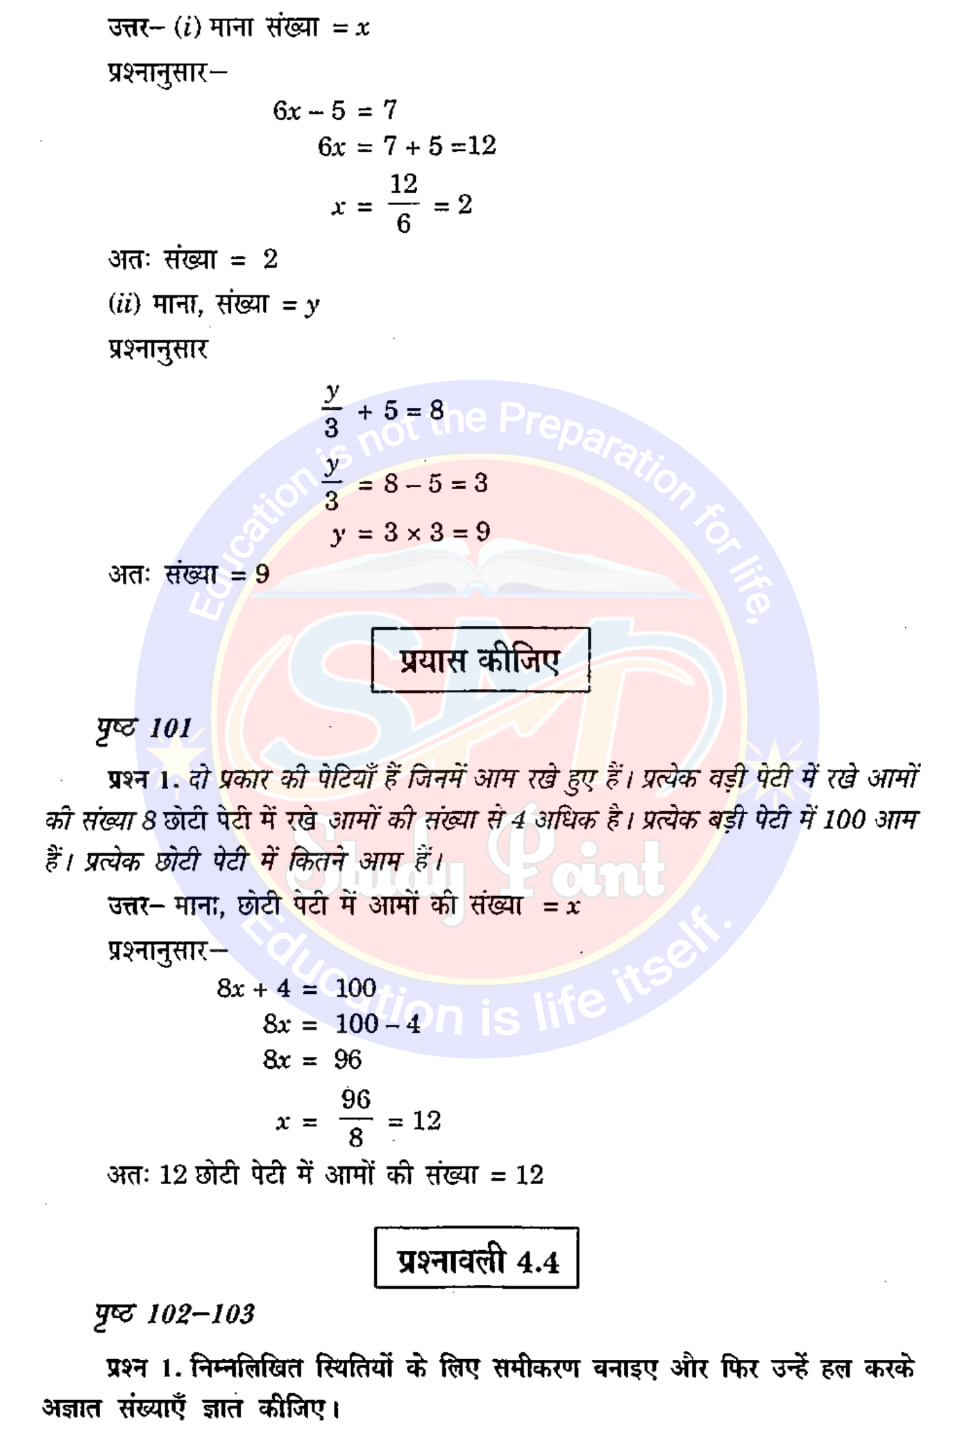 Class 7th NCERT Math Chapter 4  Simple Equation  सरल समीकरण  प्रश्नावली 4.4  SM Study Point